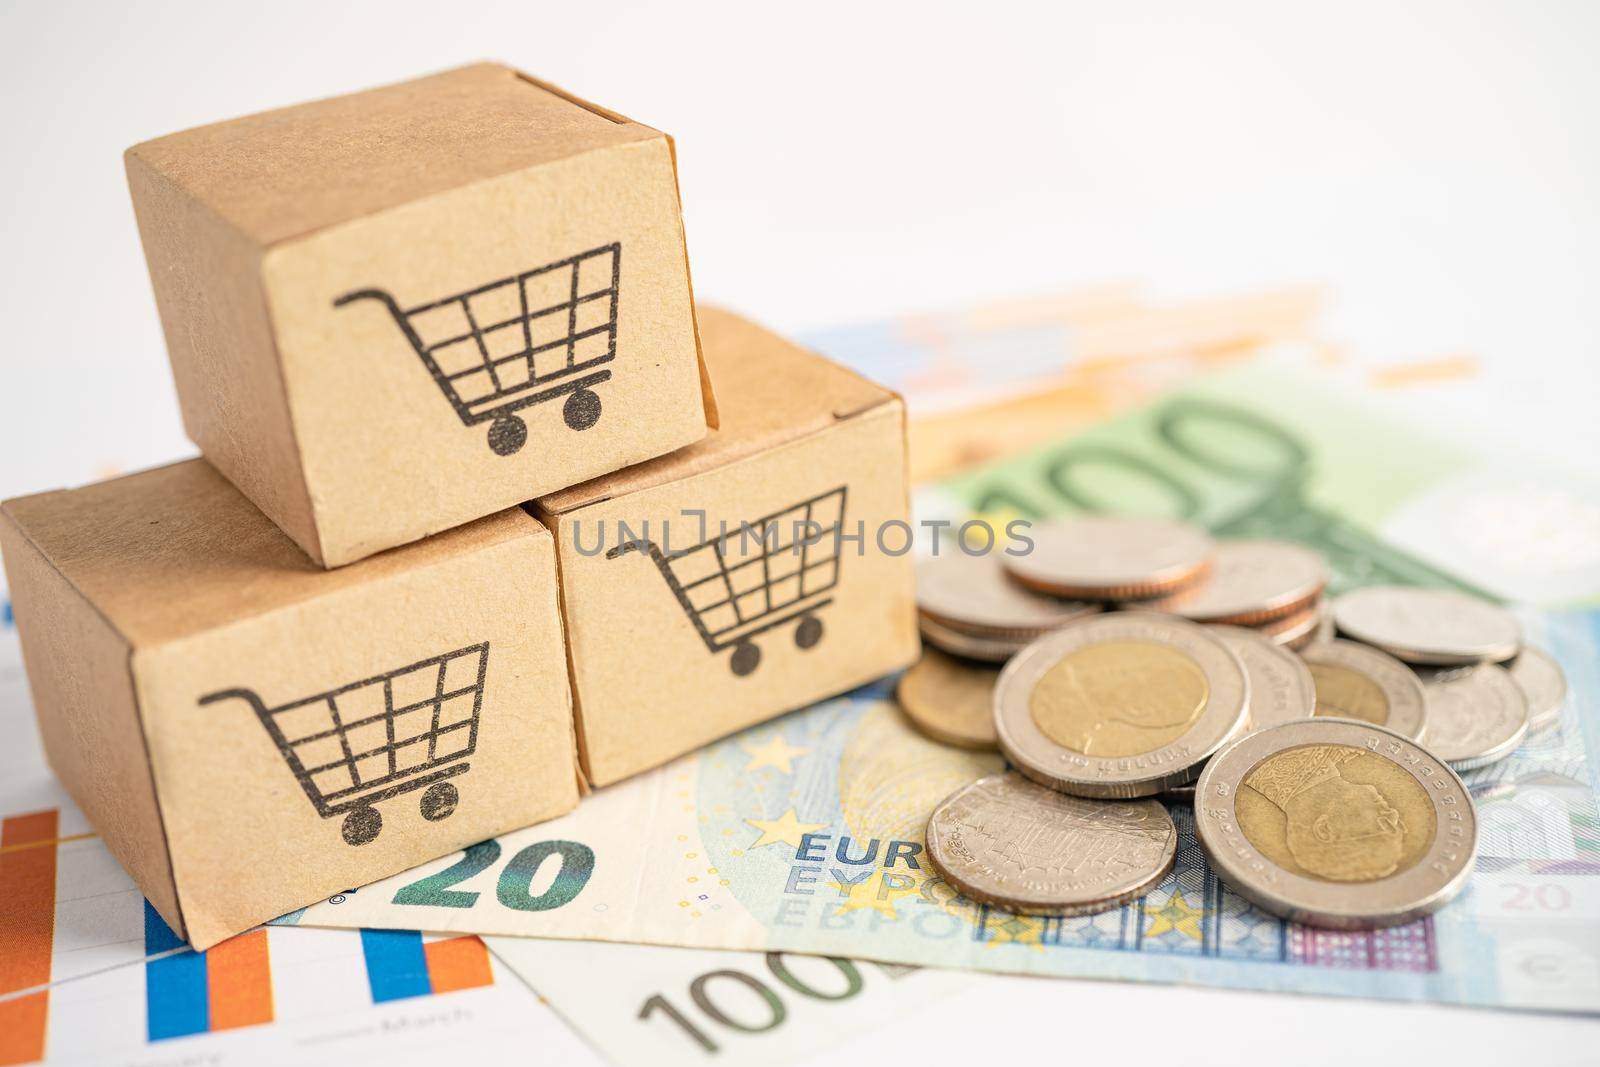 Shopping cart logo on box with US dollar banknotes, Banking Account, Investment Analytic research data economy, trading, Business import export online company concept. by pamai